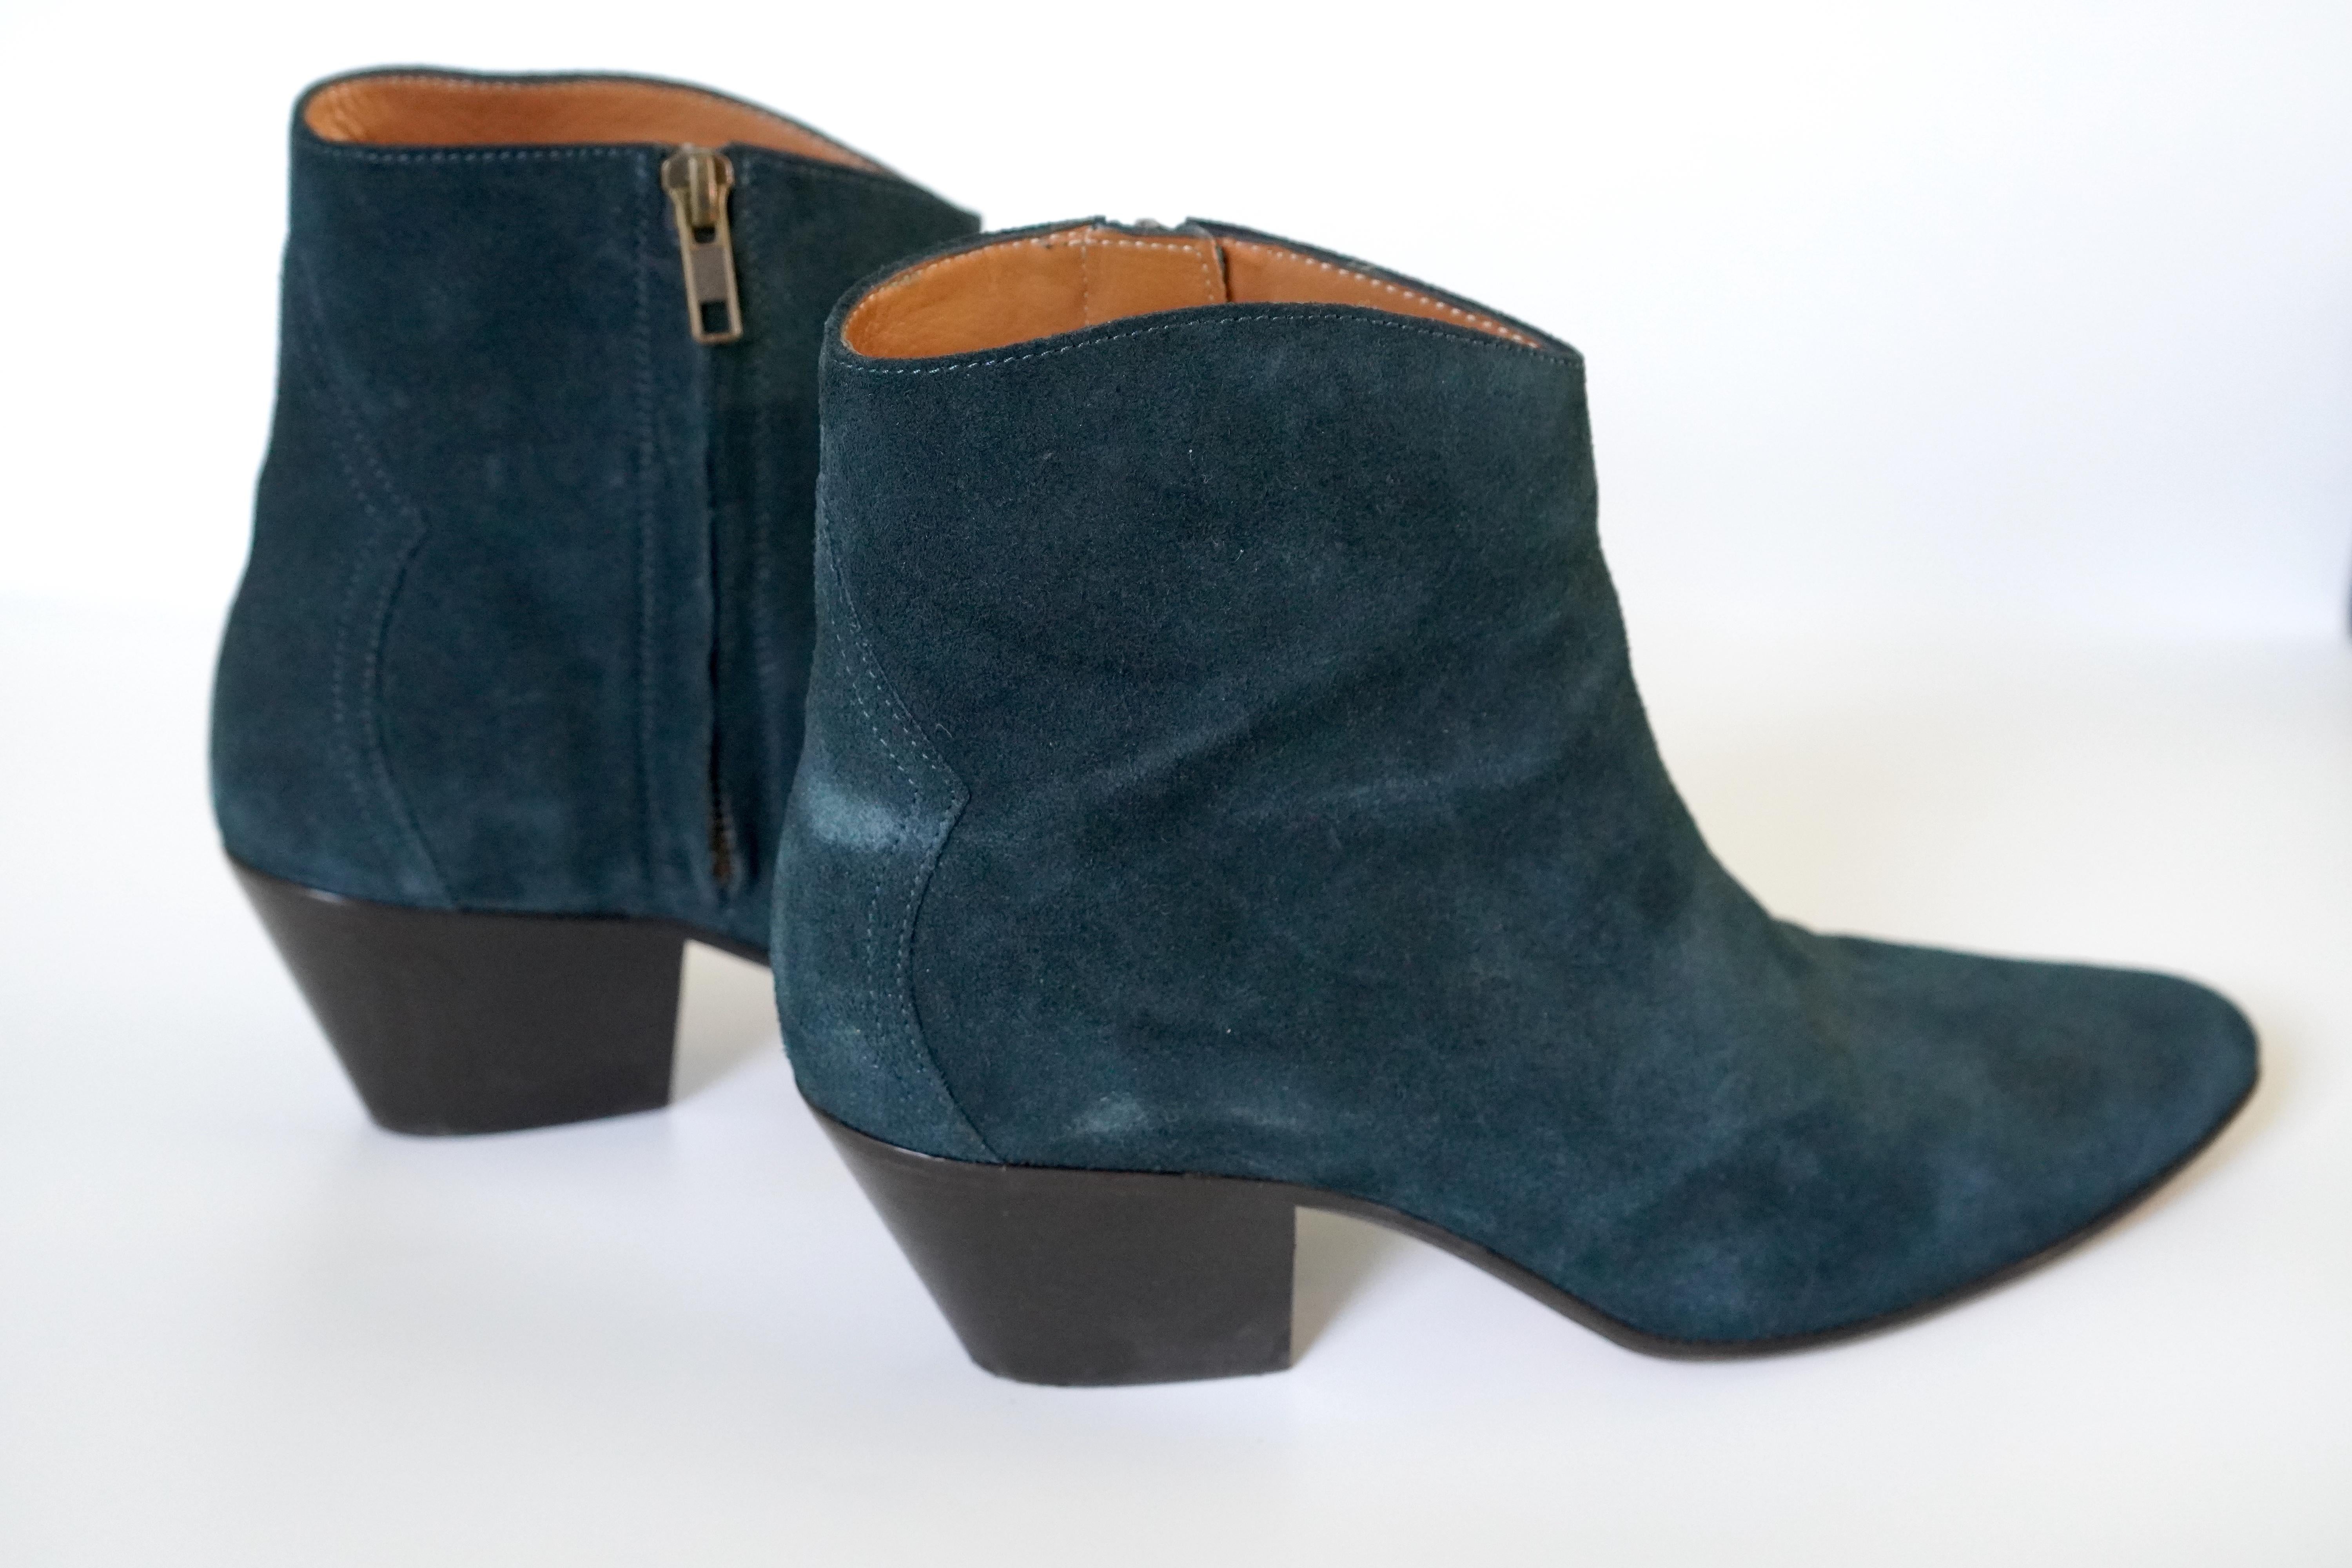 Isabel Marant Blue ankle boots. These boots are made of 100% leather in a beautiful dark blue color. The heel height is 2 inches and feature a side zip on the inside ankle of each boot. Previously worn, with minor signs of wear, still in great